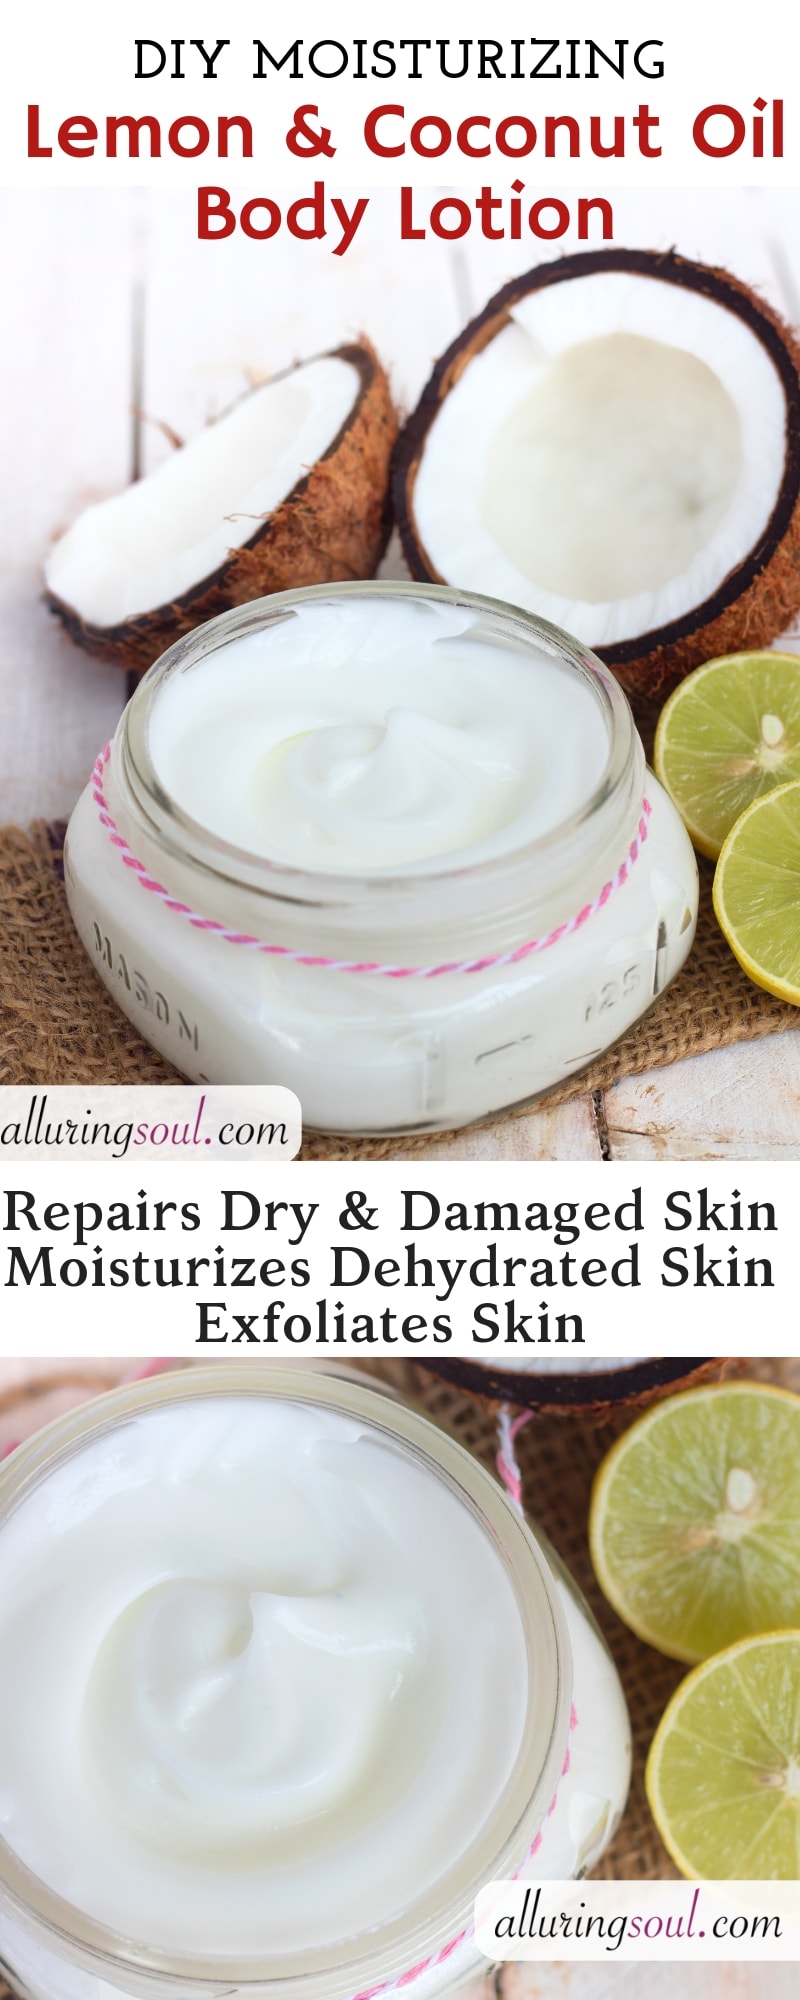 lemon and coconut oil body lotion